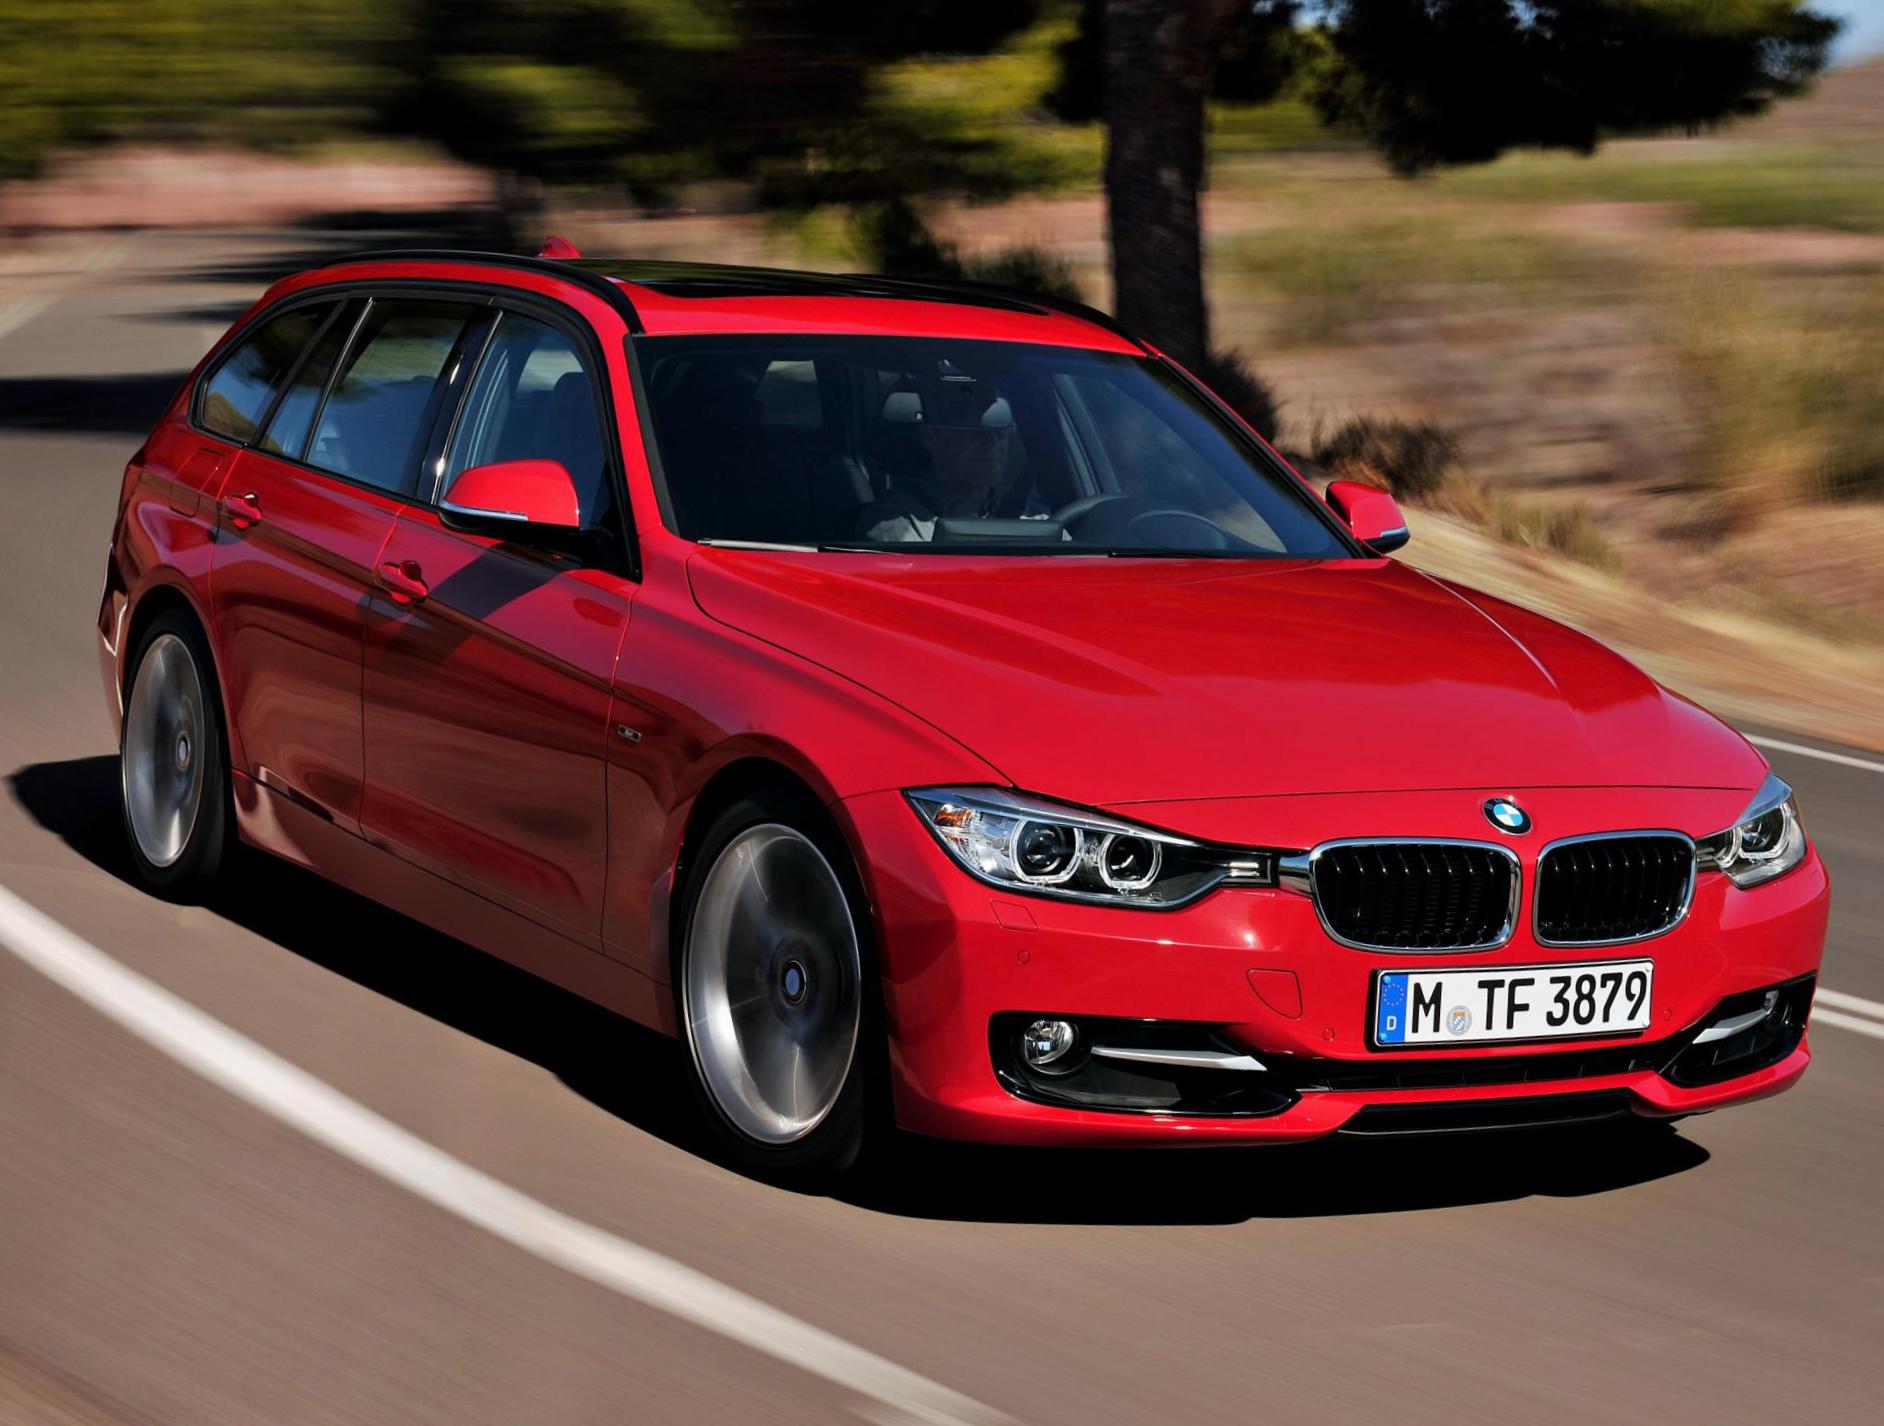 3 Series Touring (F31) BMW Specification 2010